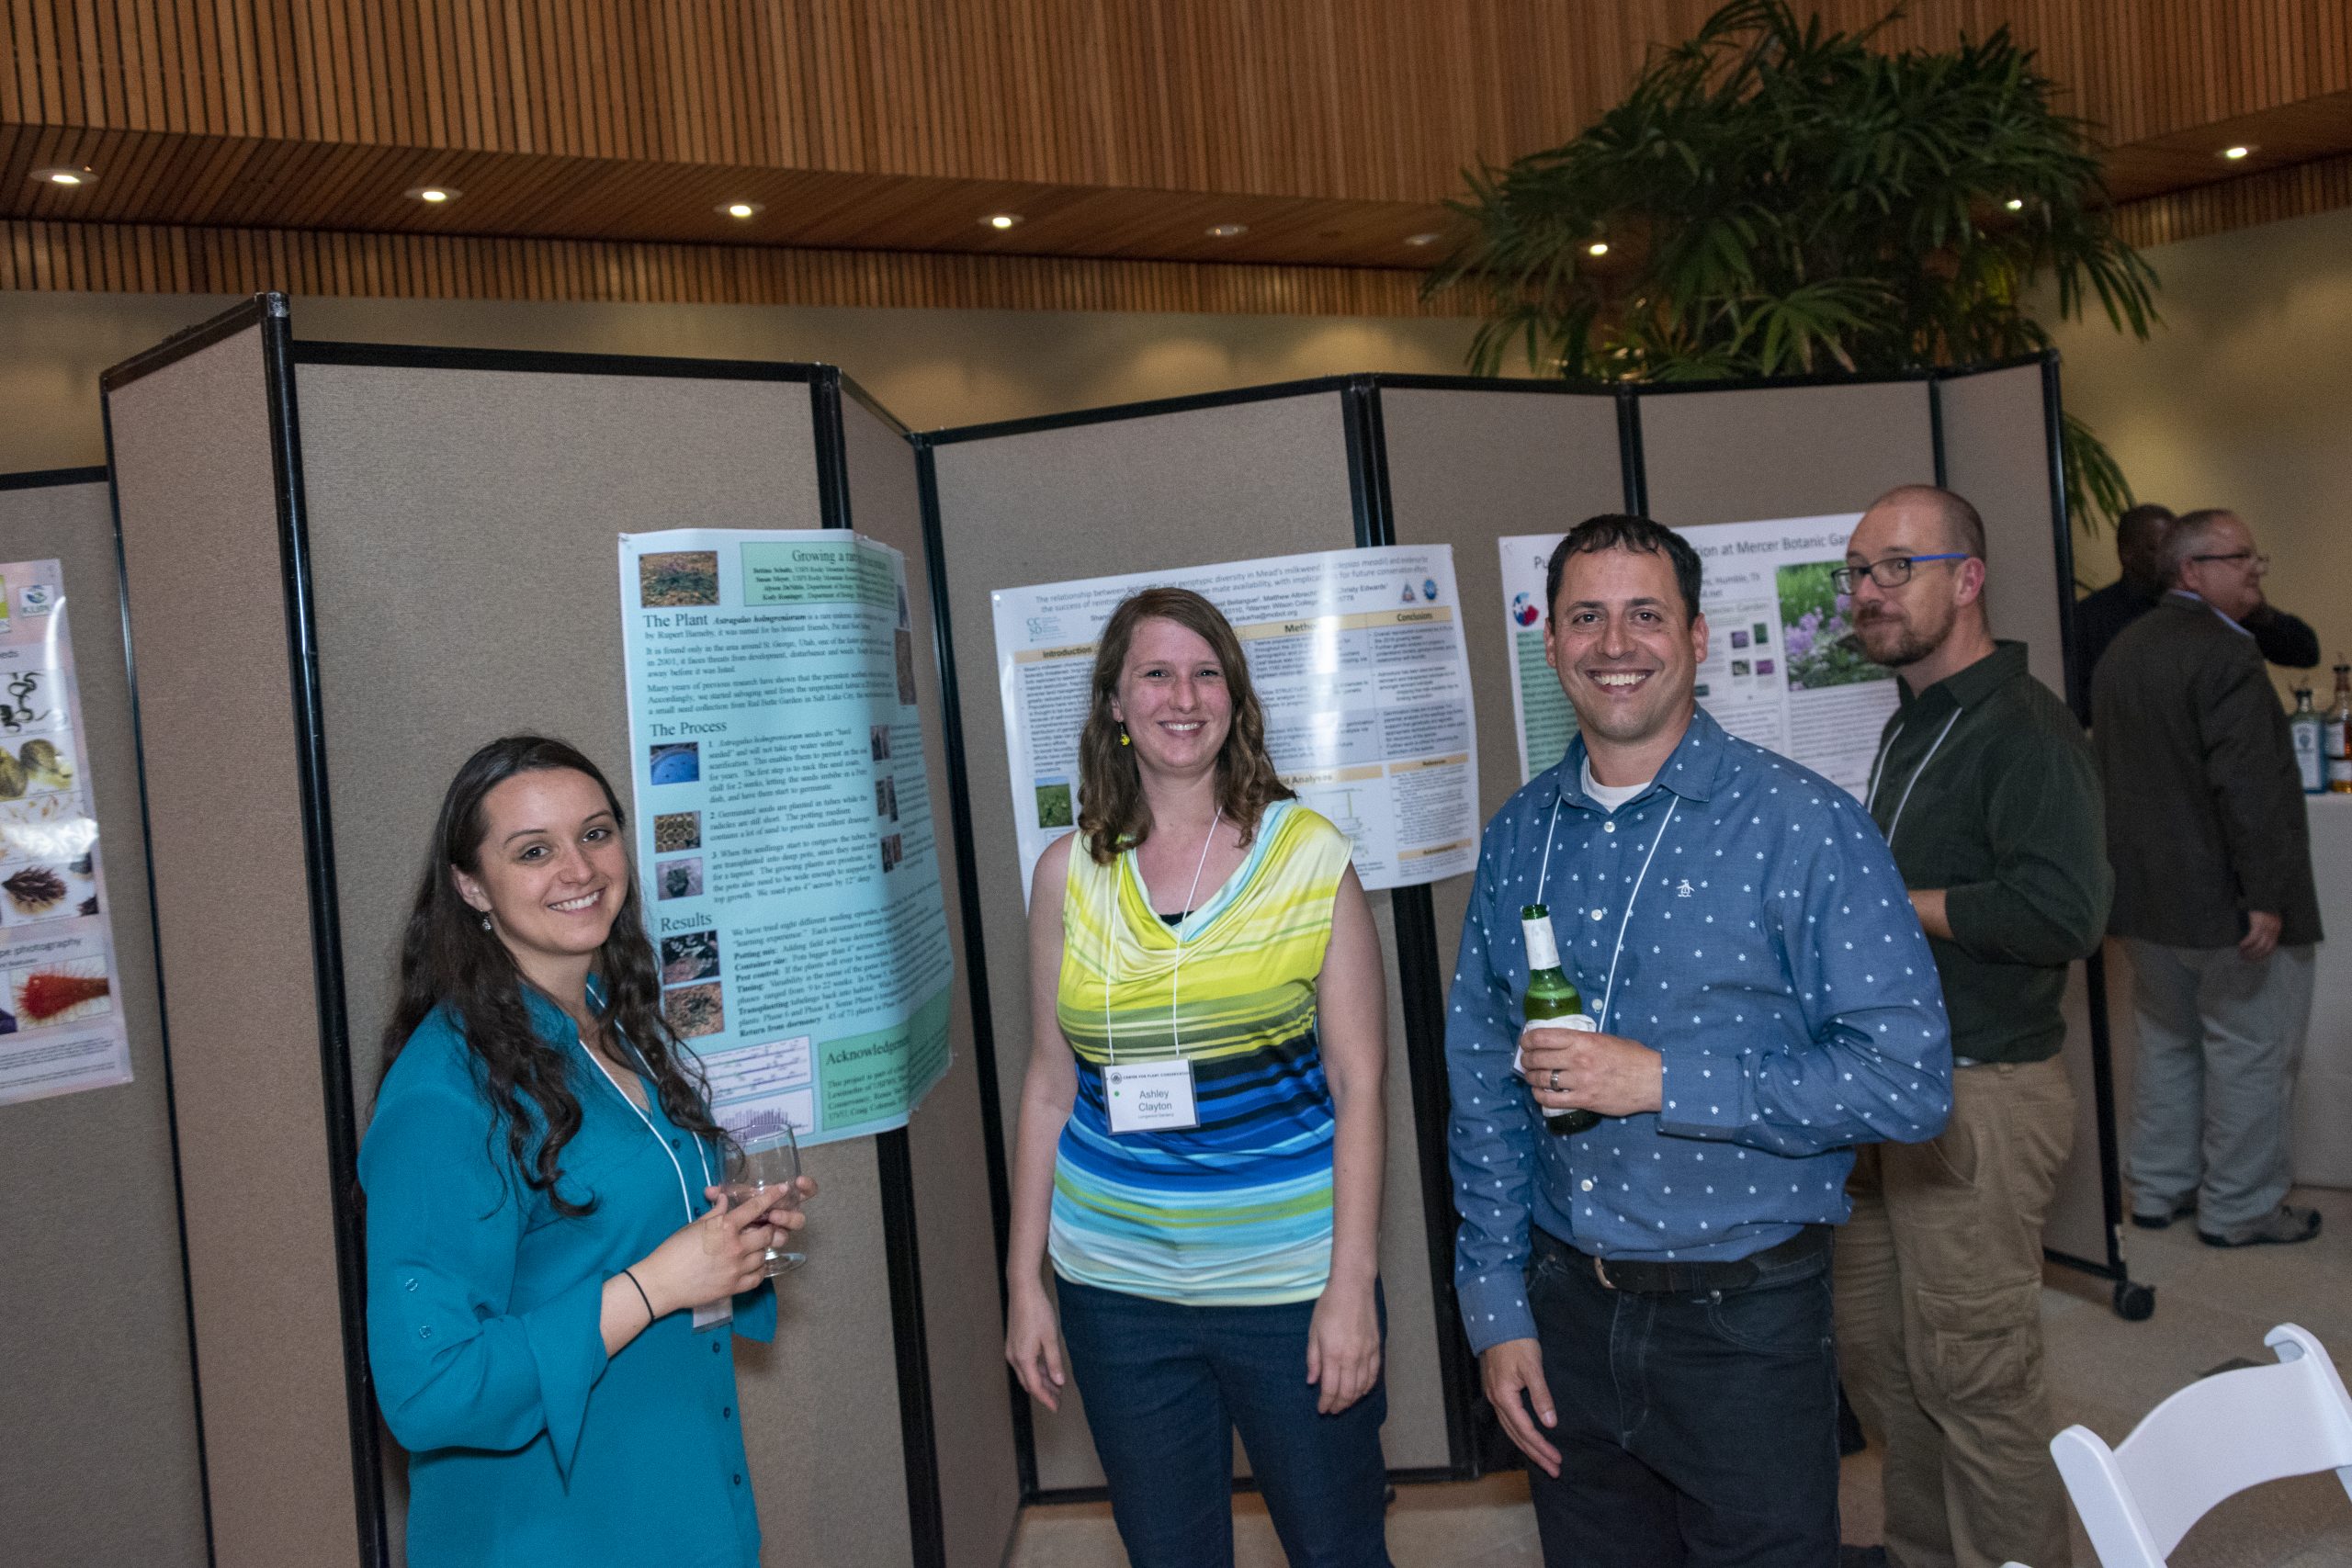 National Meeting poster session, 2019, Chicago